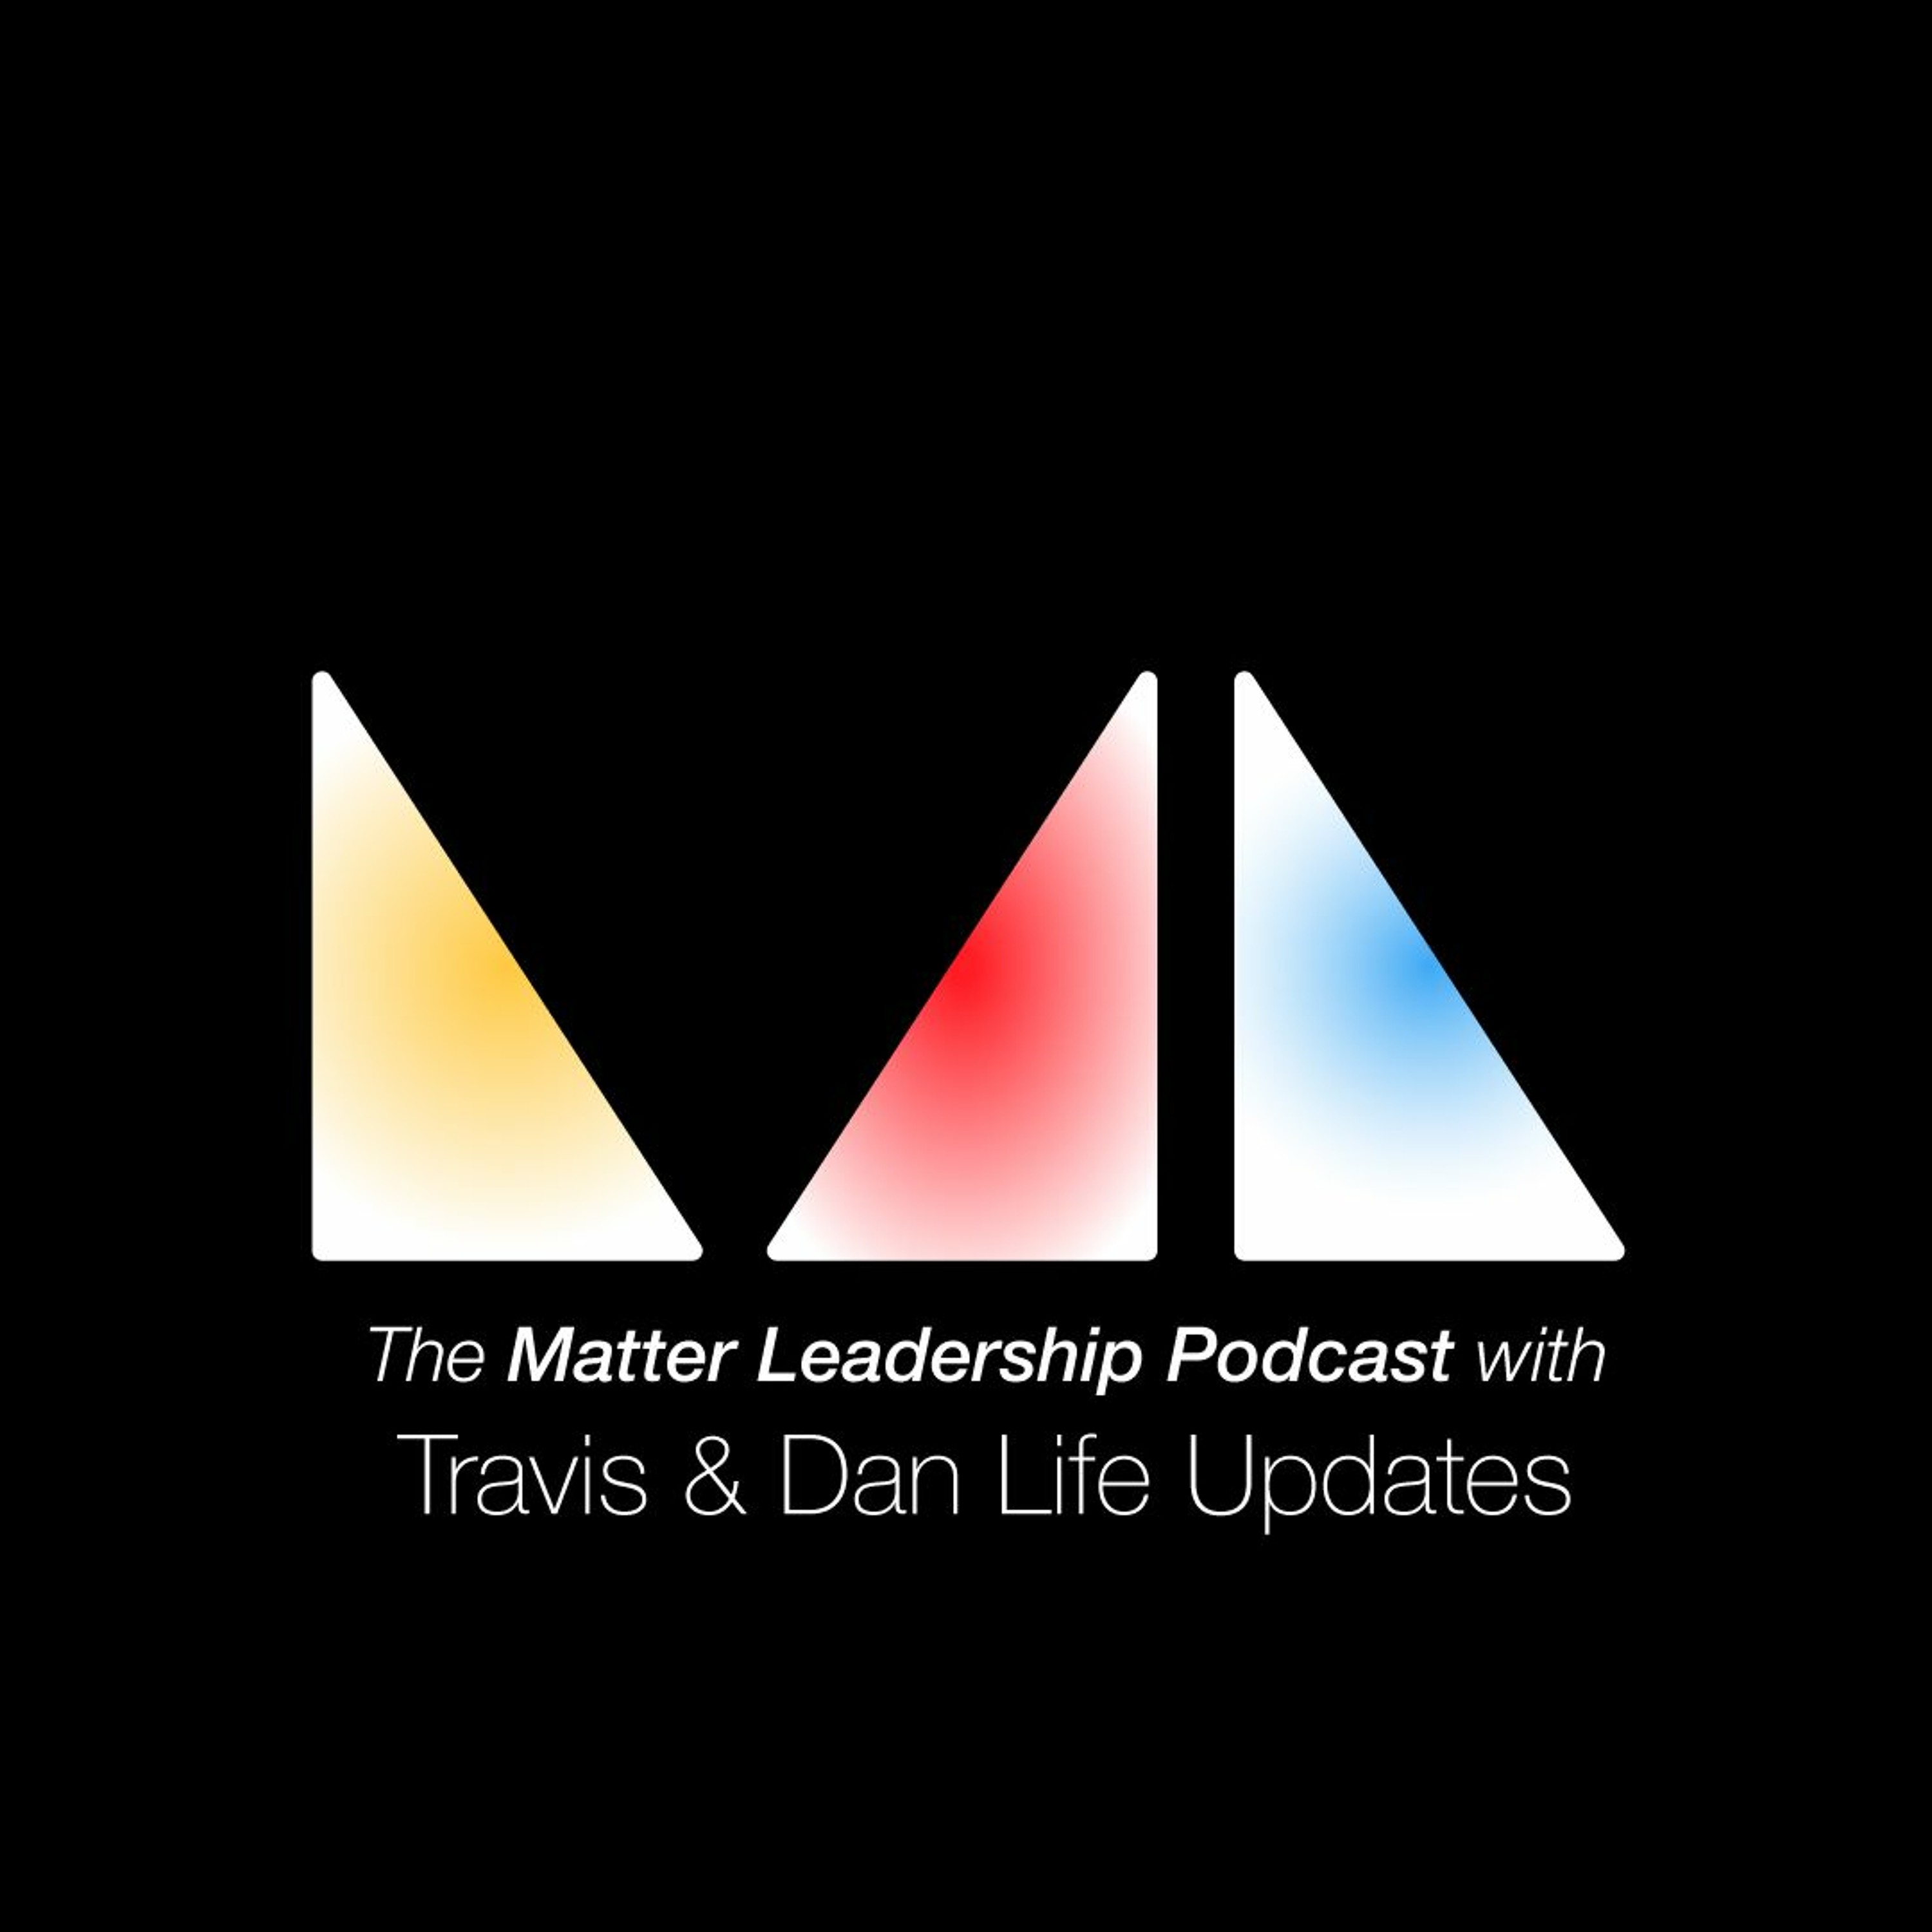 The Matter Leadership Podcast: Travis and Dan Life Updates